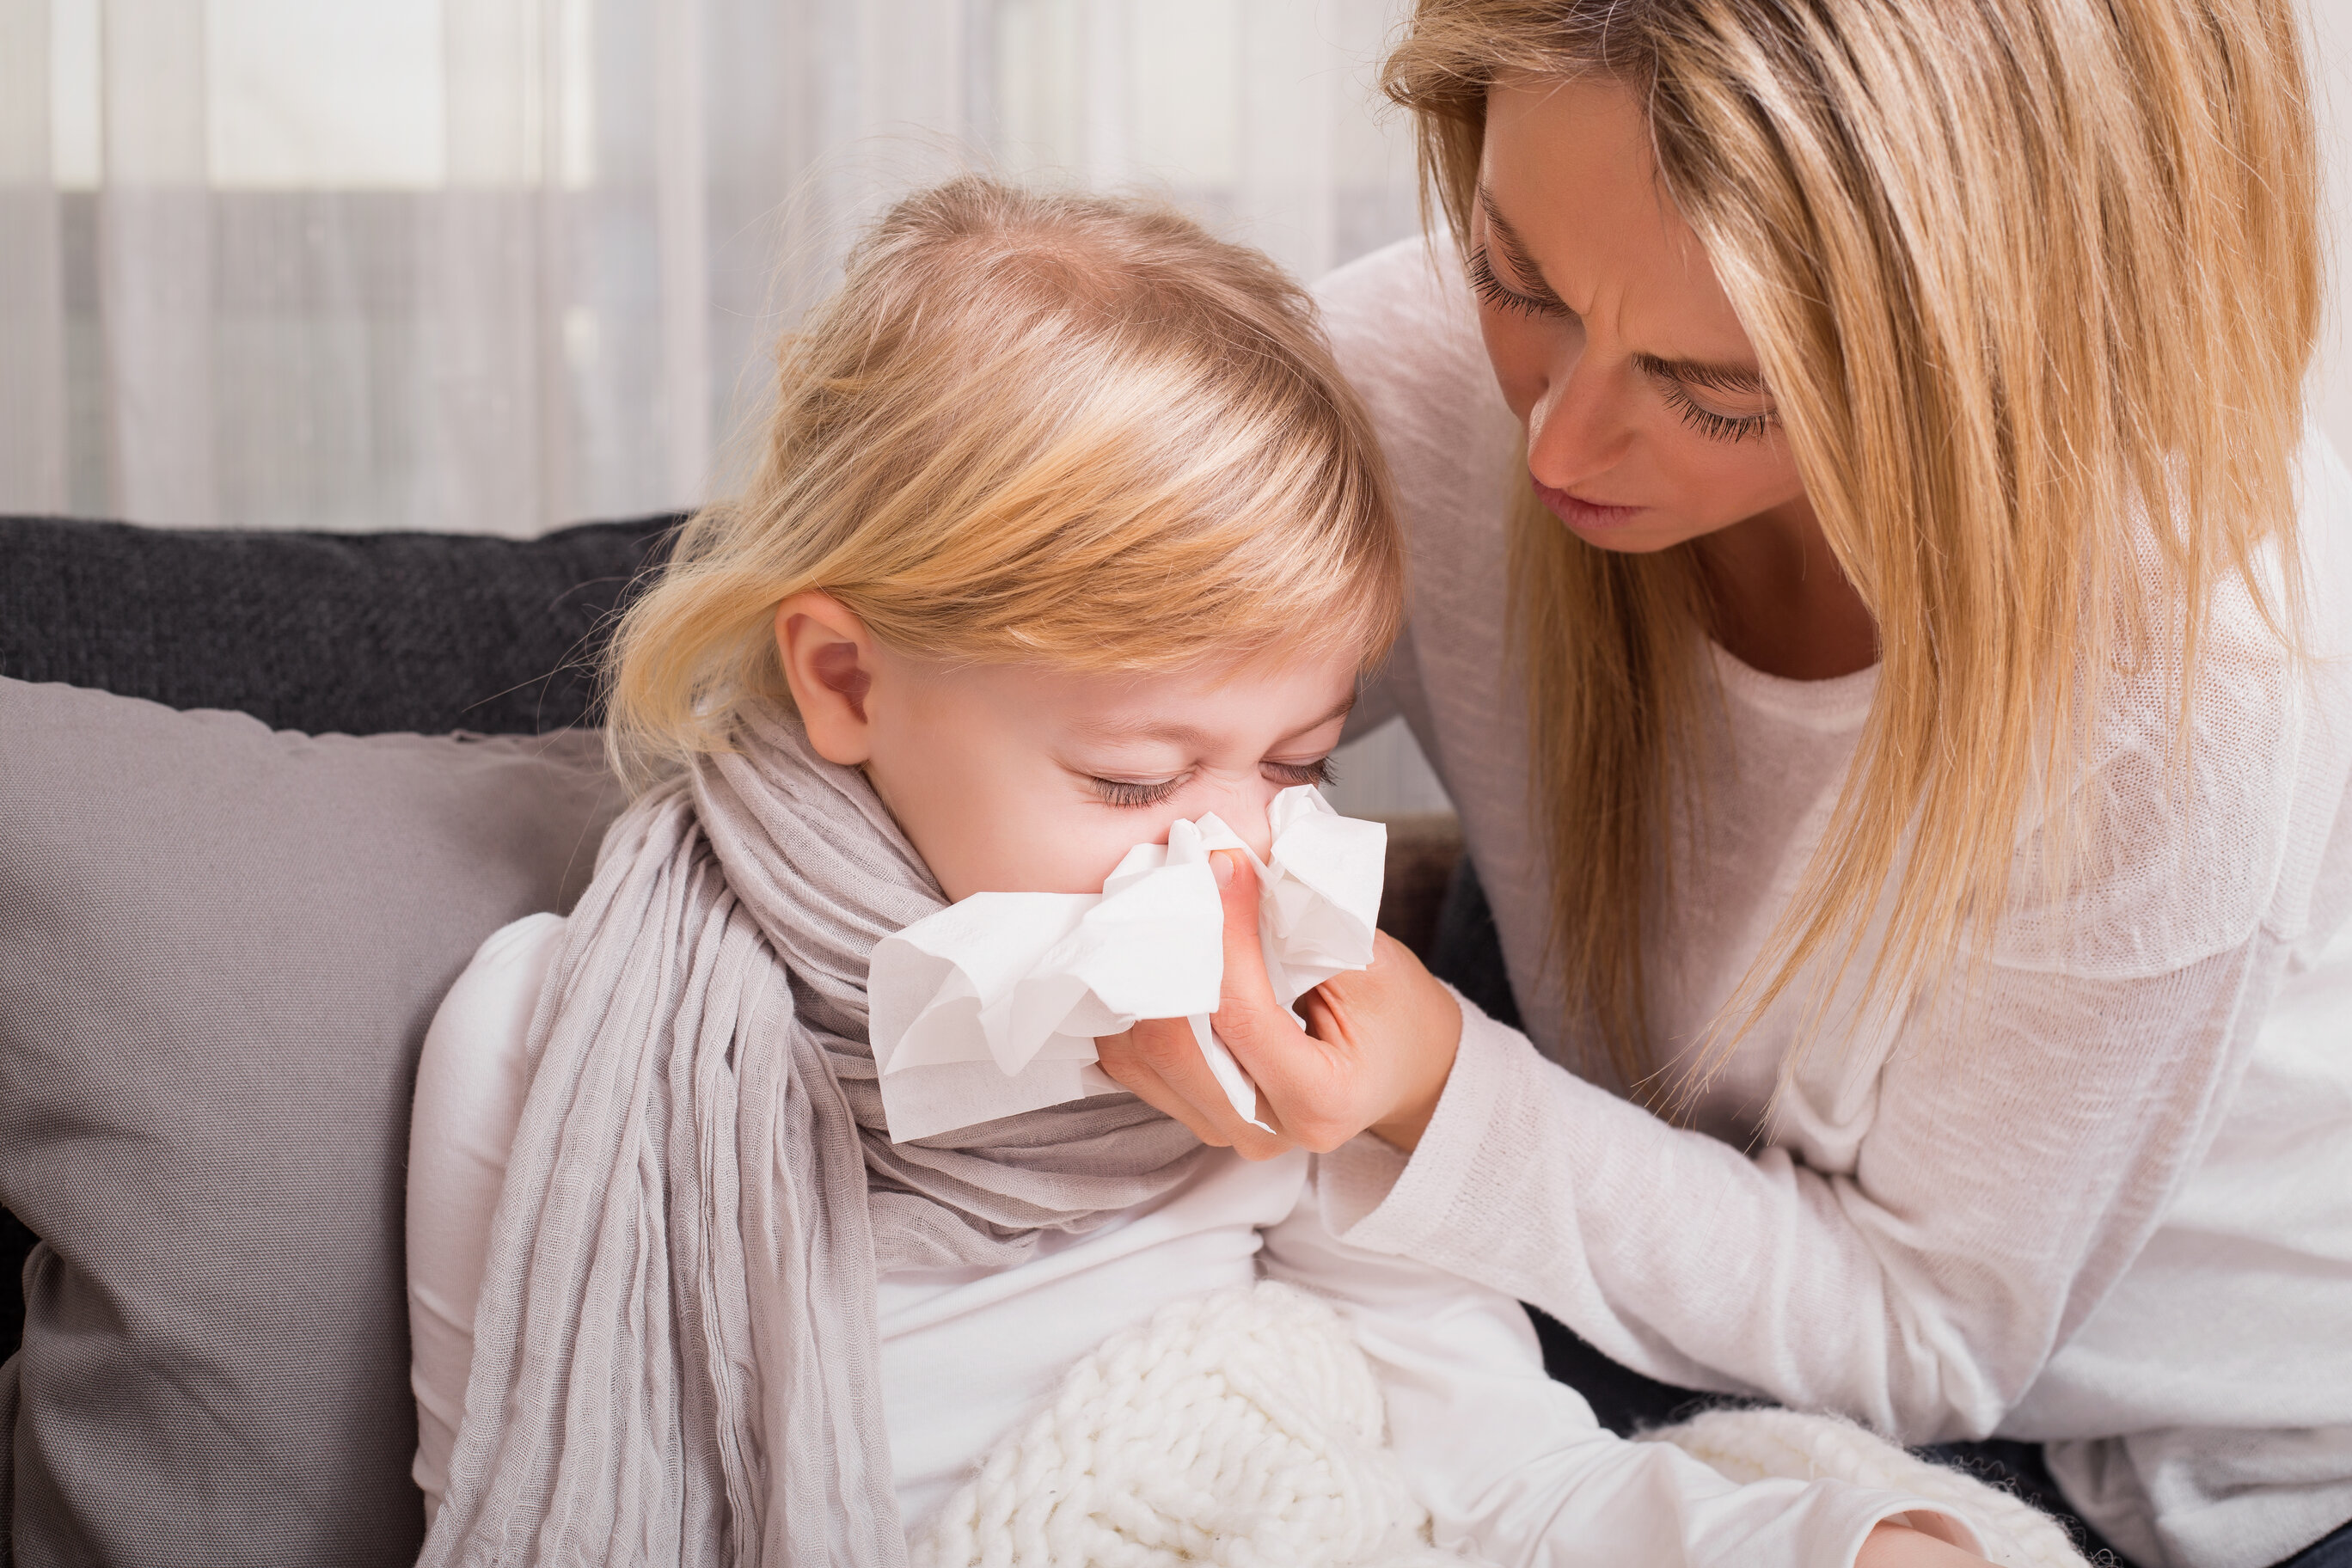 “Children with just a runny nose should still go to school